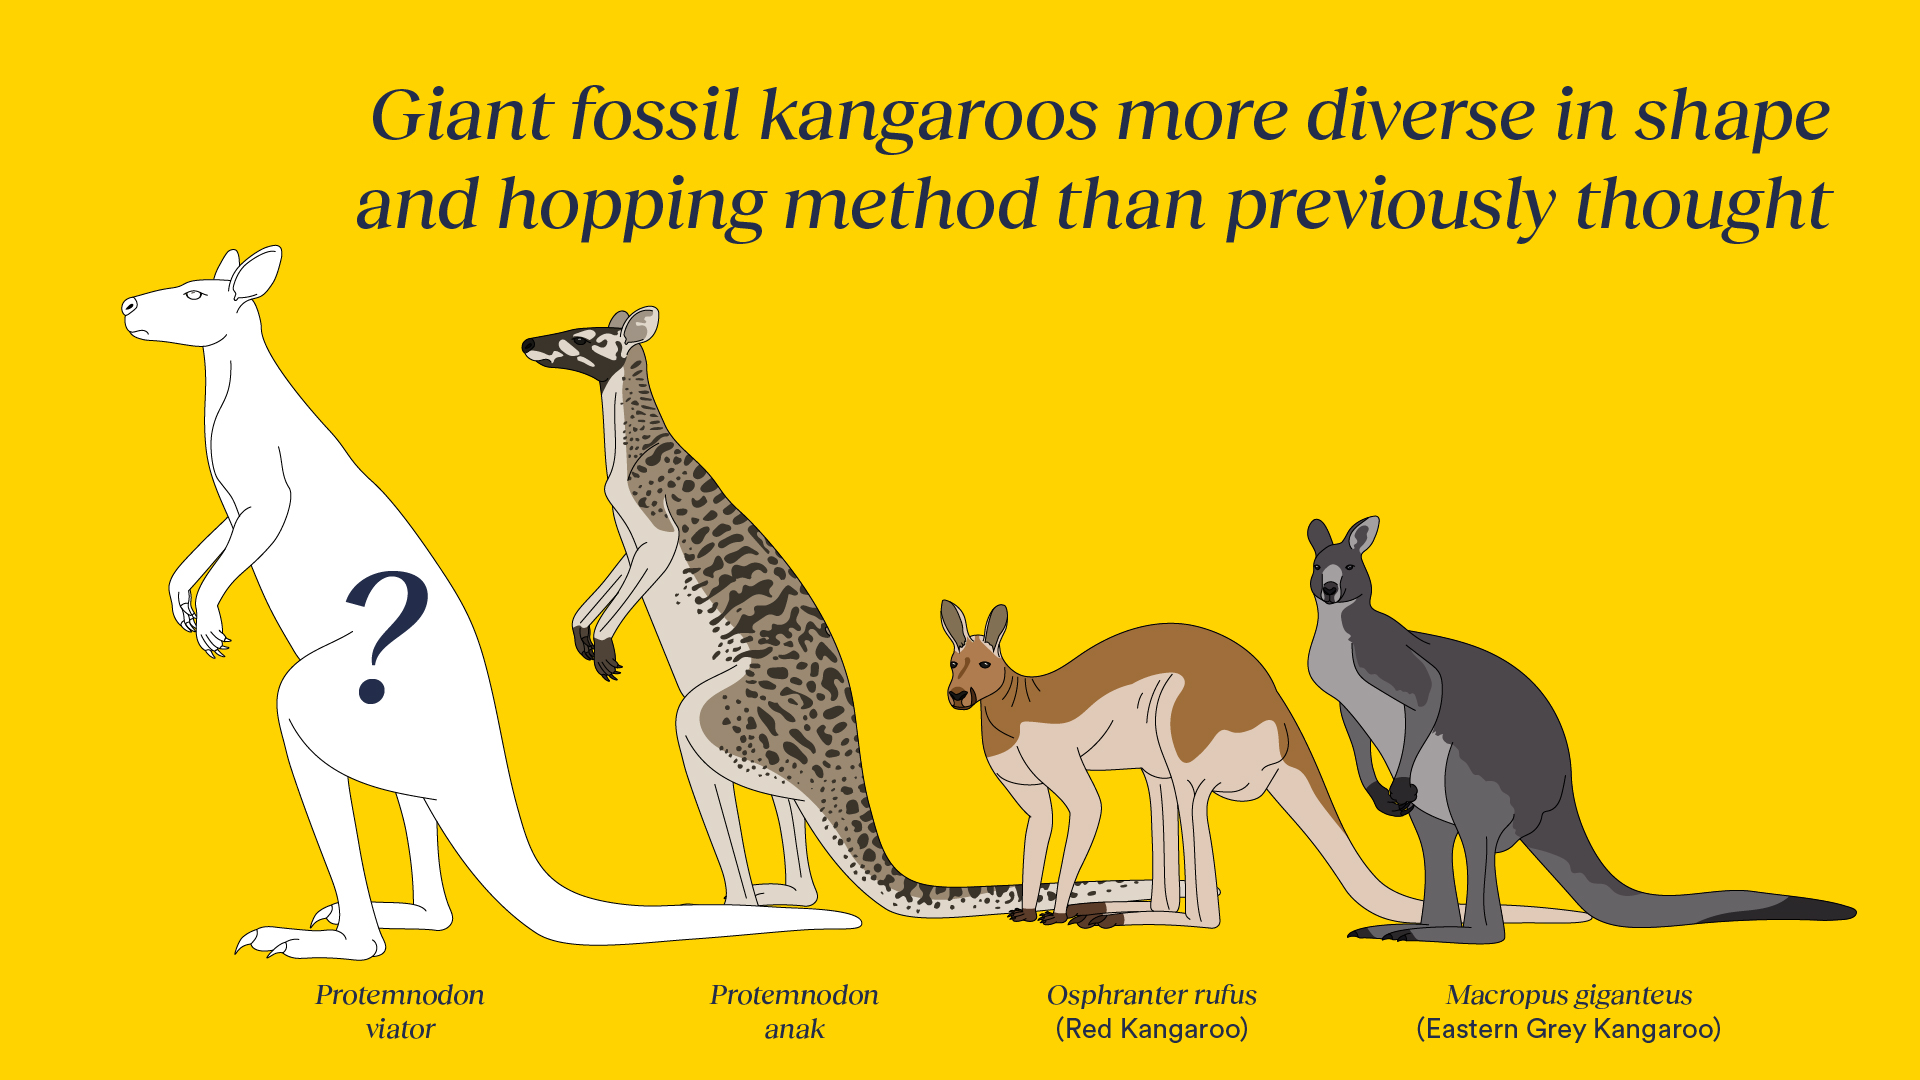 Four digitally drawn kangaroos stand. One is just a silhouette, one is an extinct giant kangaroo and two common kangaroos. 